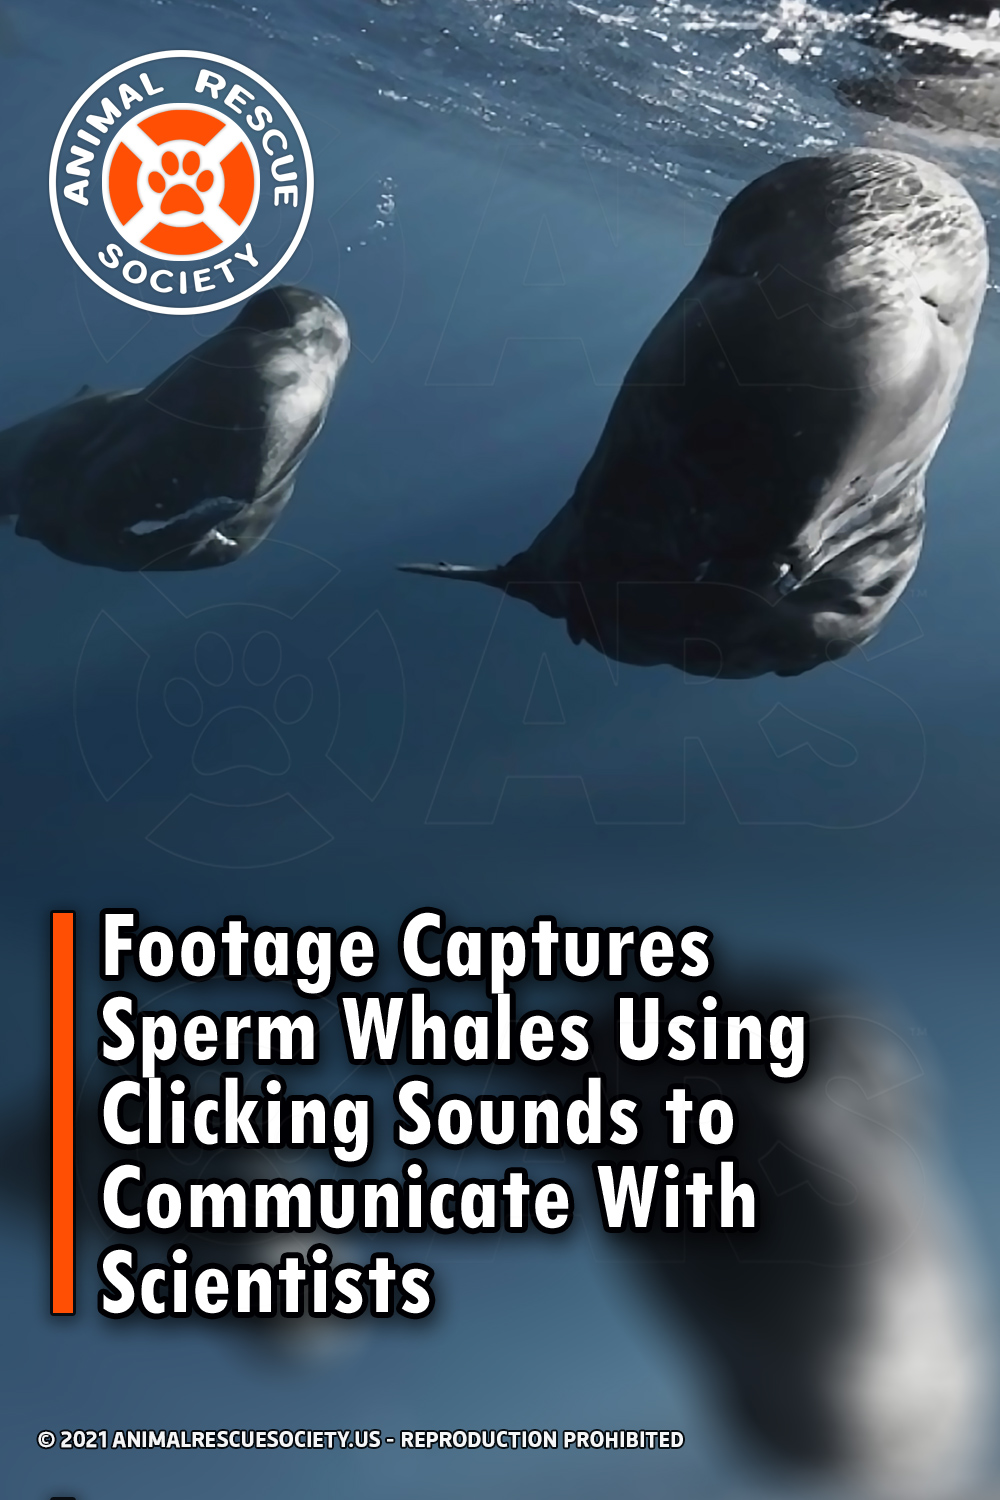 Footage Captures Sperm Whales Using Clicking Sounds to Communicate With Scientists